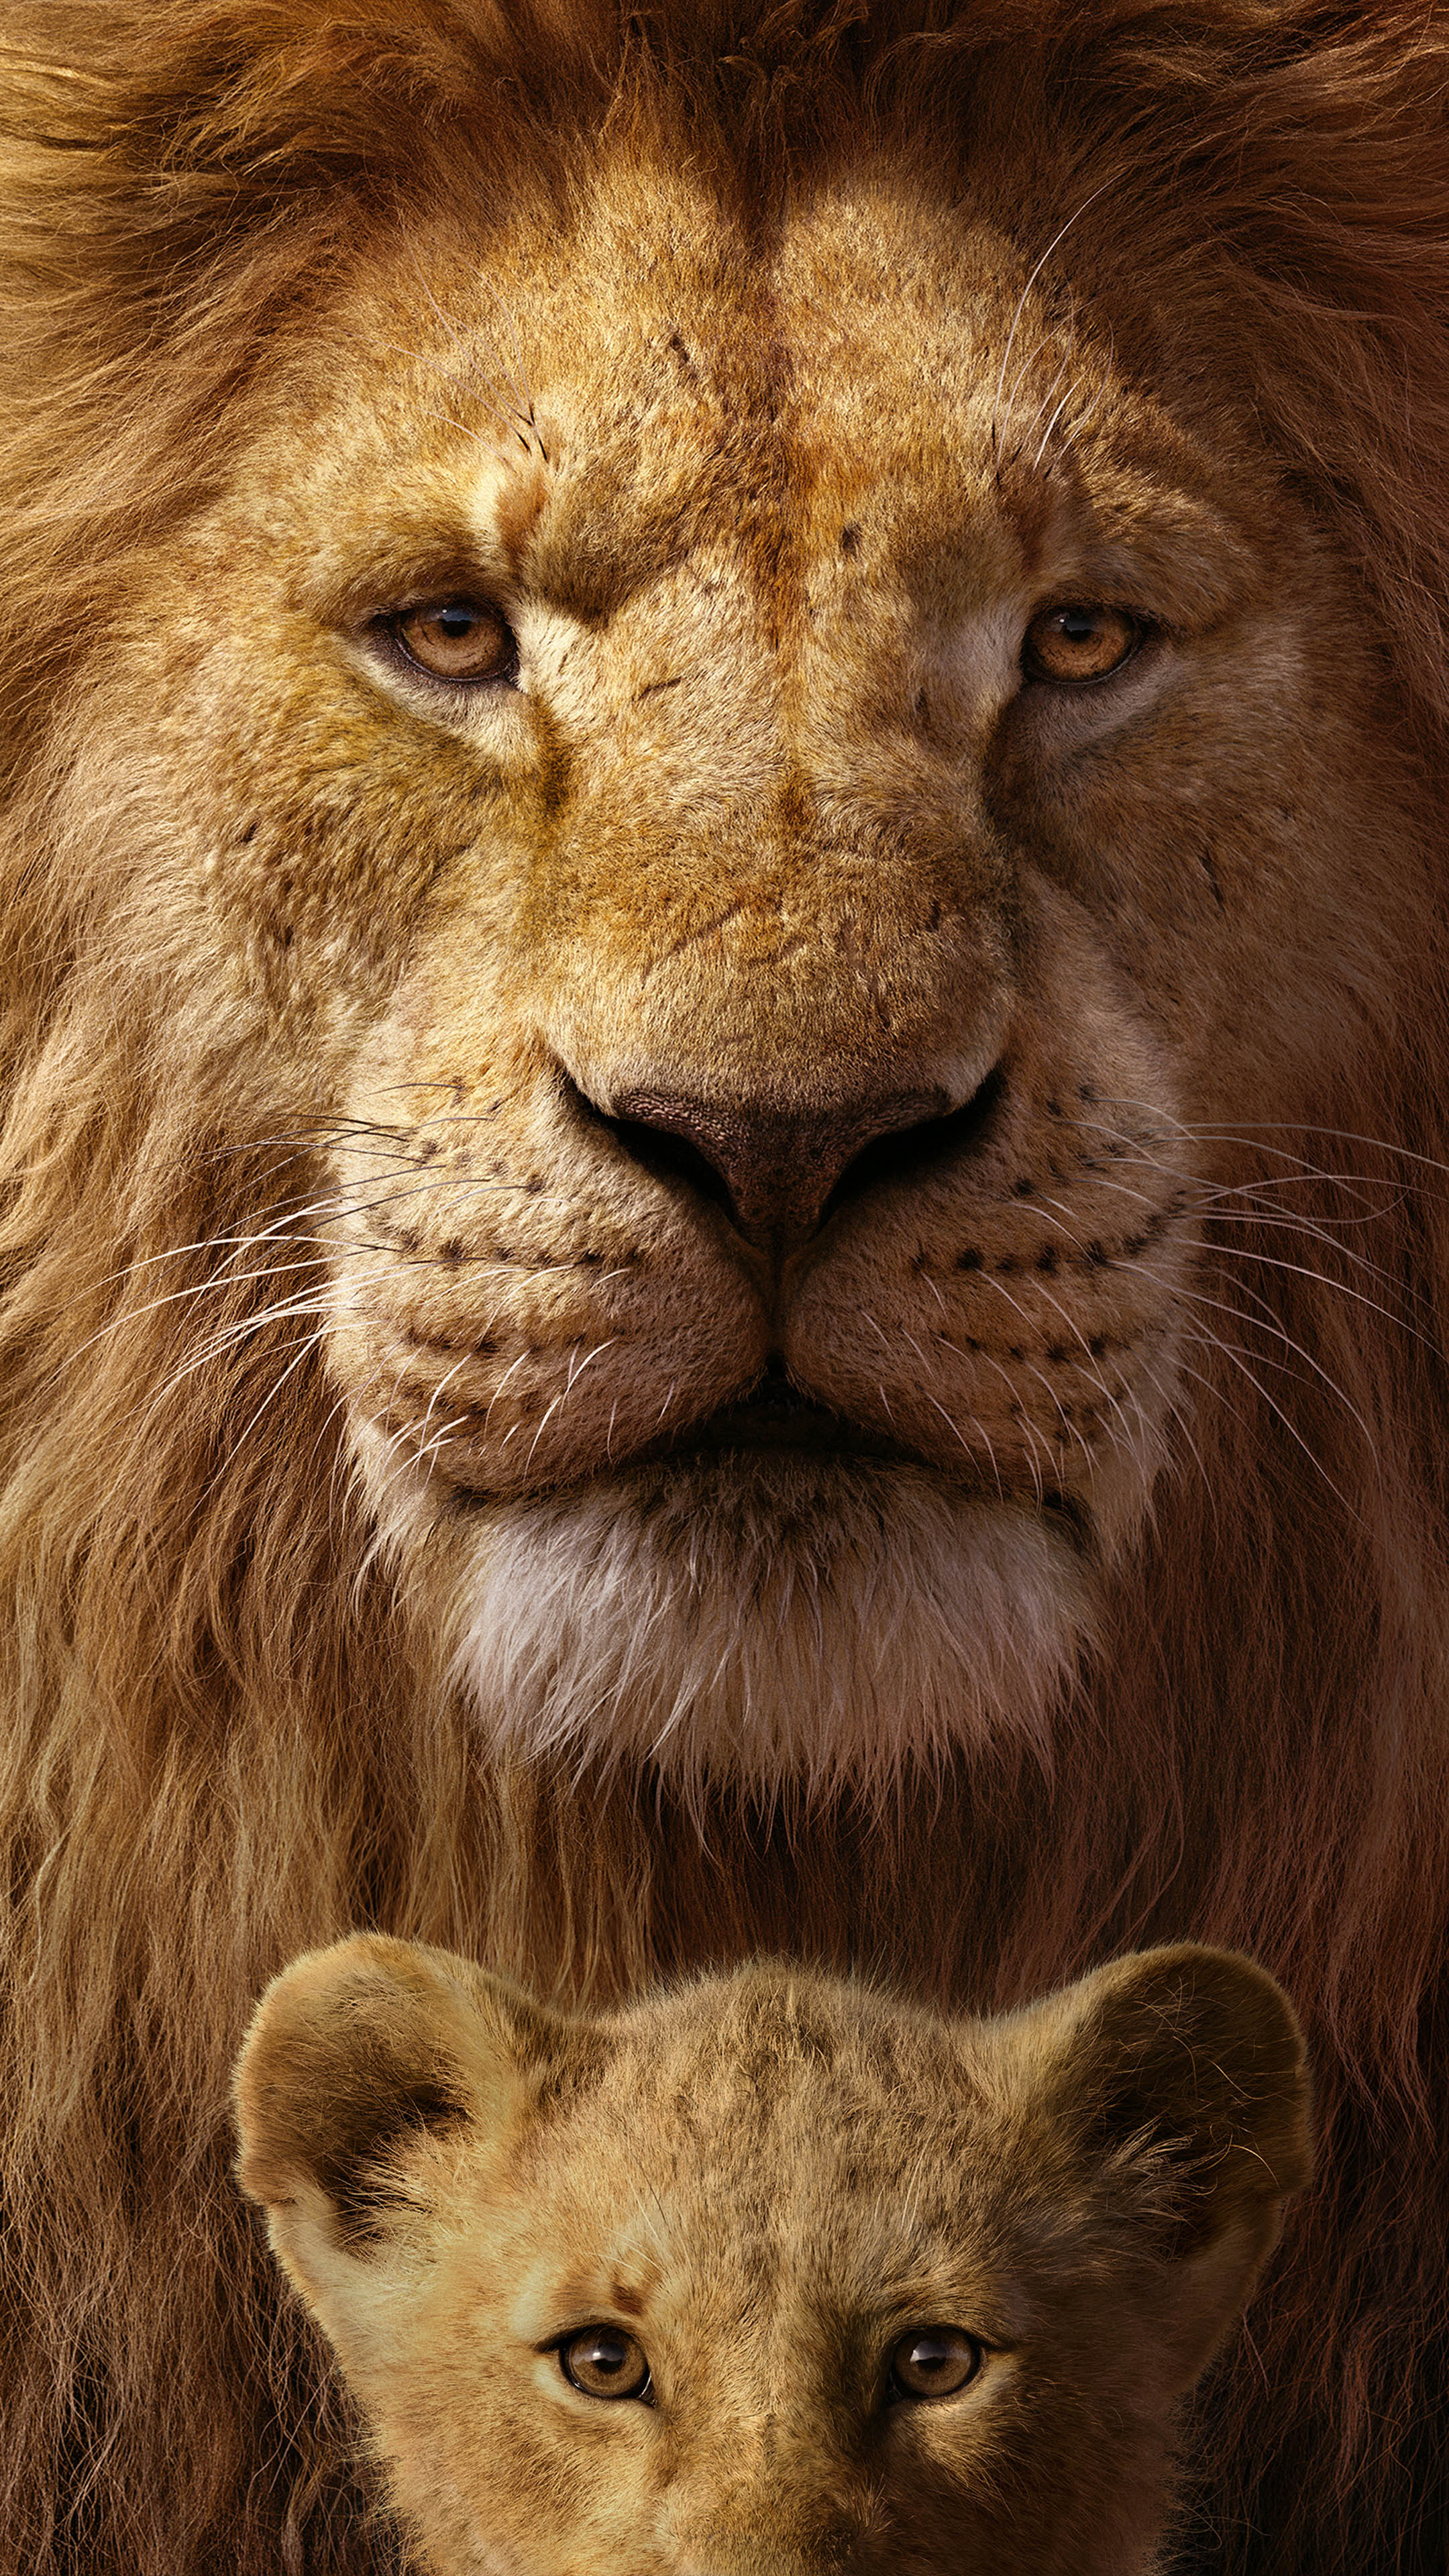 40 The Lion King 2019 HD Wallpapers and Backgrounds